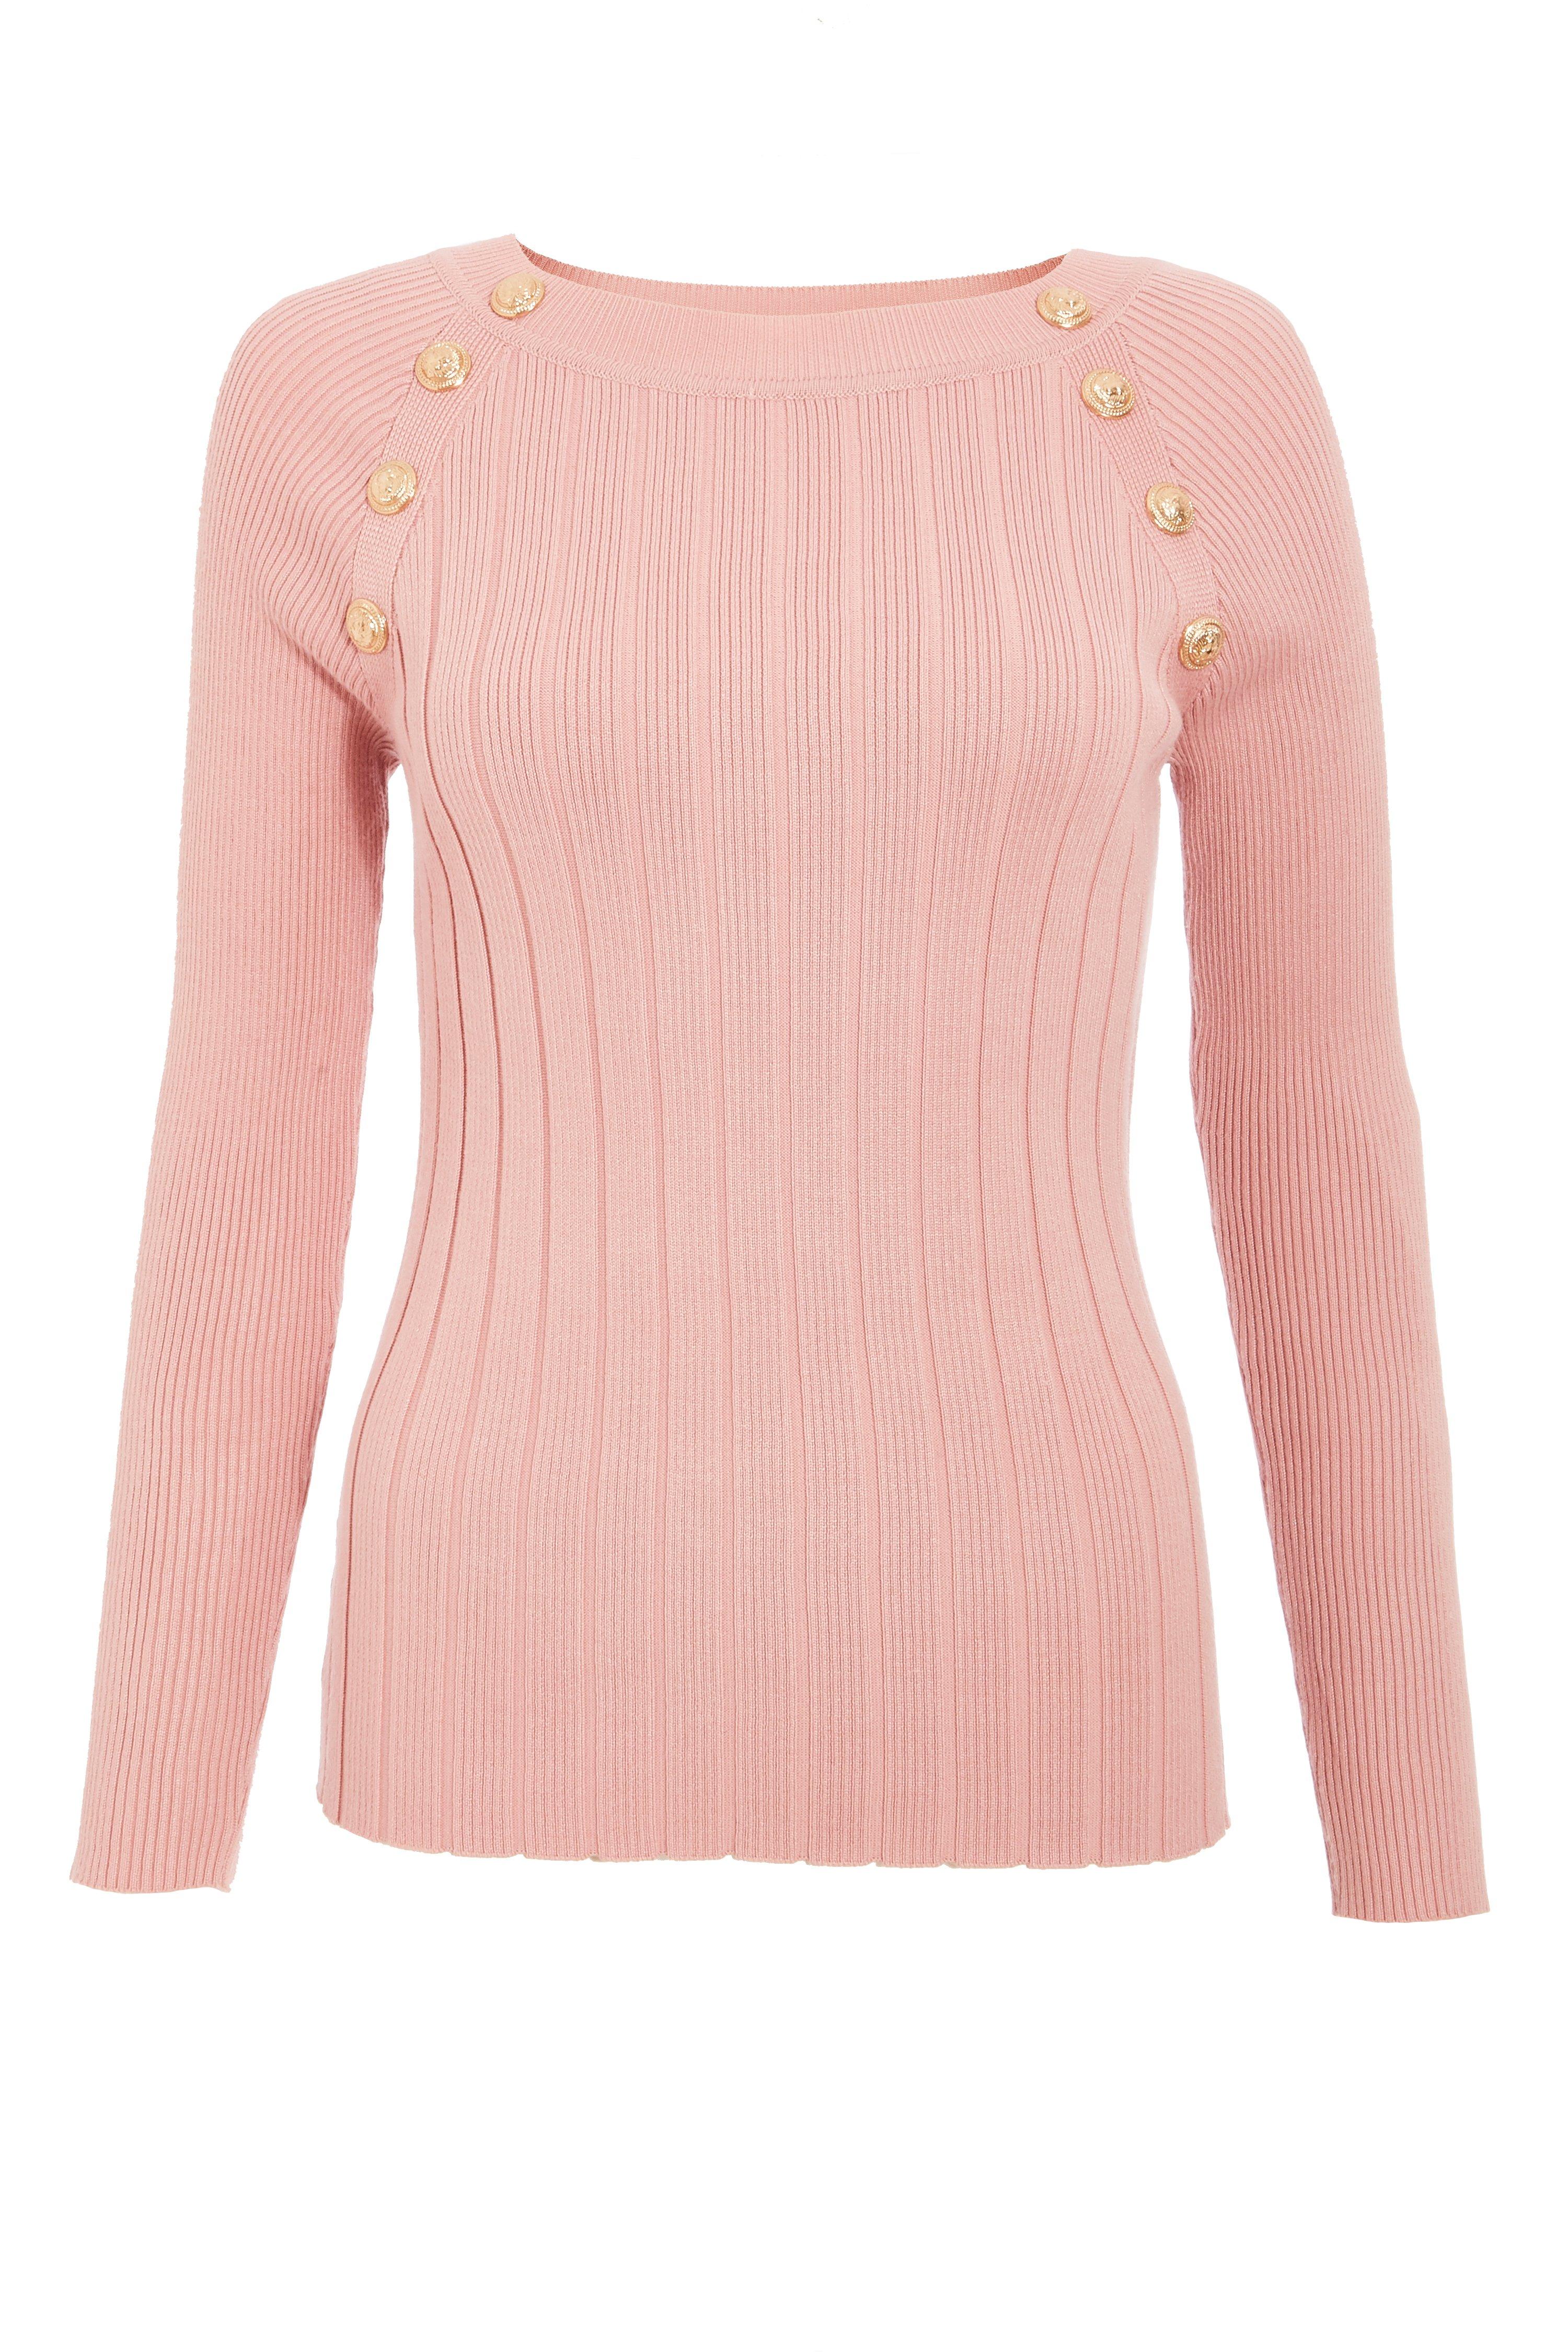 Pink Button Detail Top - Quiz Clothing